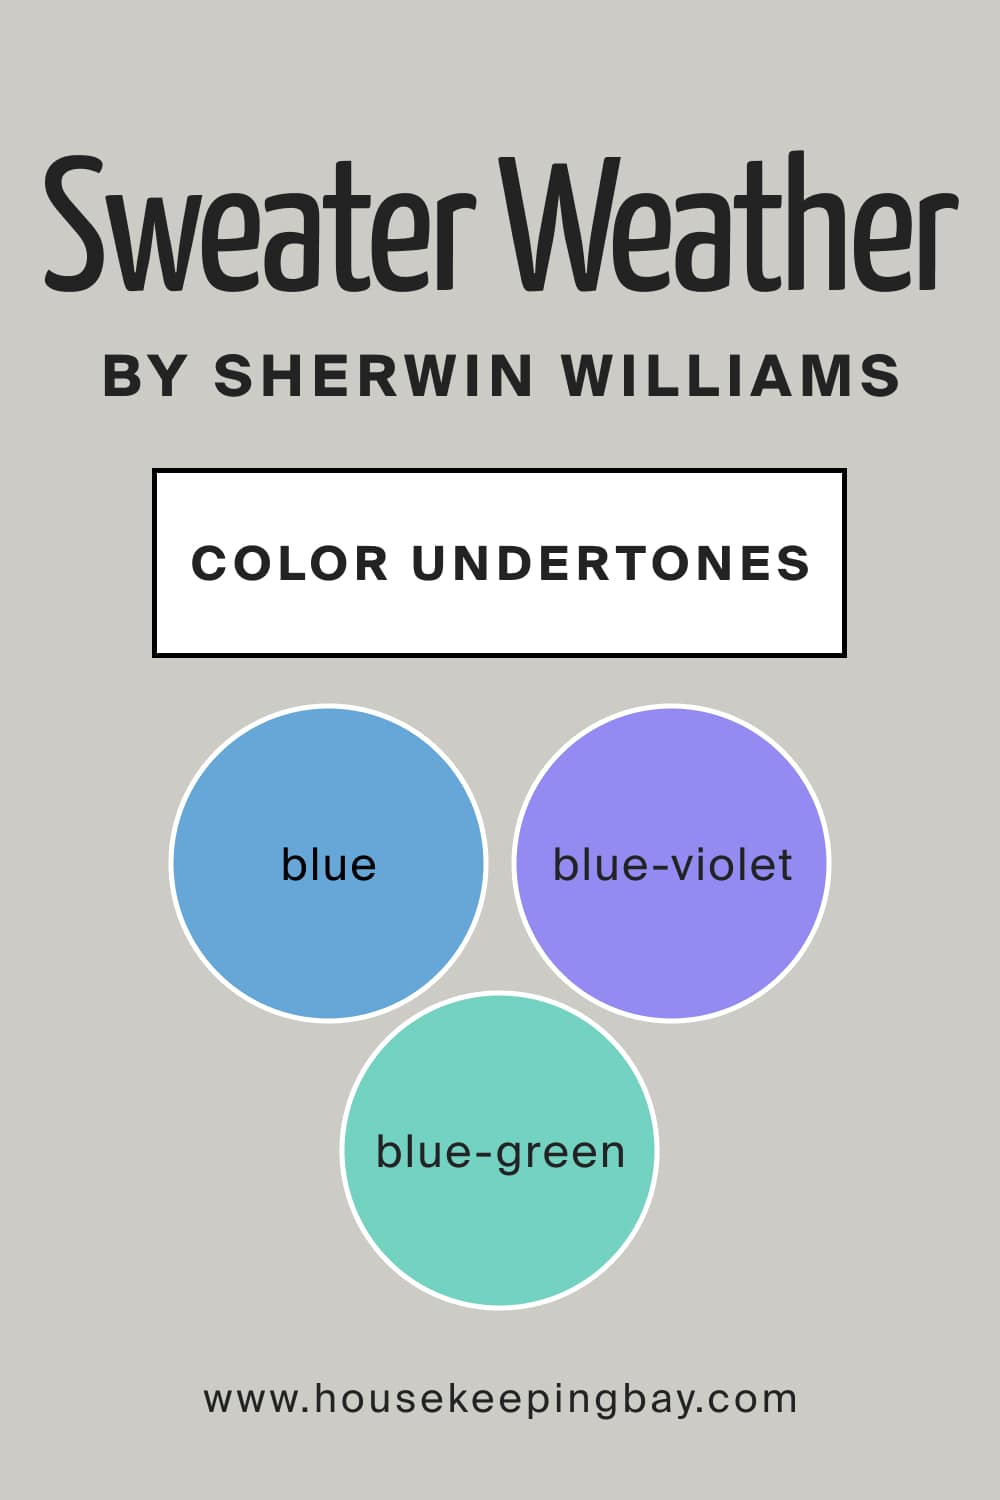 Sweater Weather SW 9548 by Sherwin Williams Color Undertones